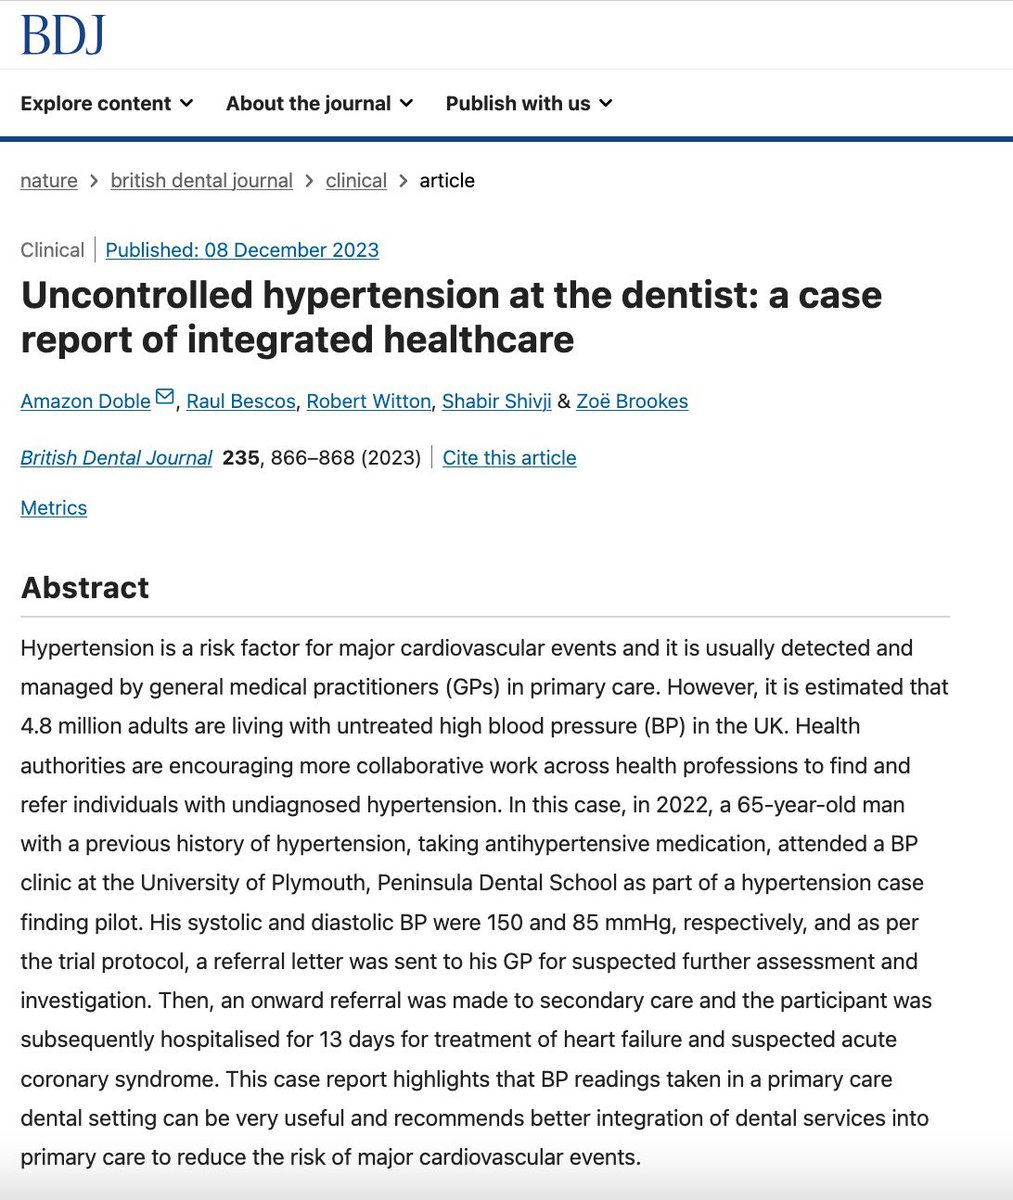 New publication! I am extremely proud to have the opportunity to carry out our health case finding clinics within @PenDentalSE and that our hard work has made a difference for the participant within this case study. @DrZeeBee1 @RaulBescos @WittonRobert nature.com/articles/s4141…